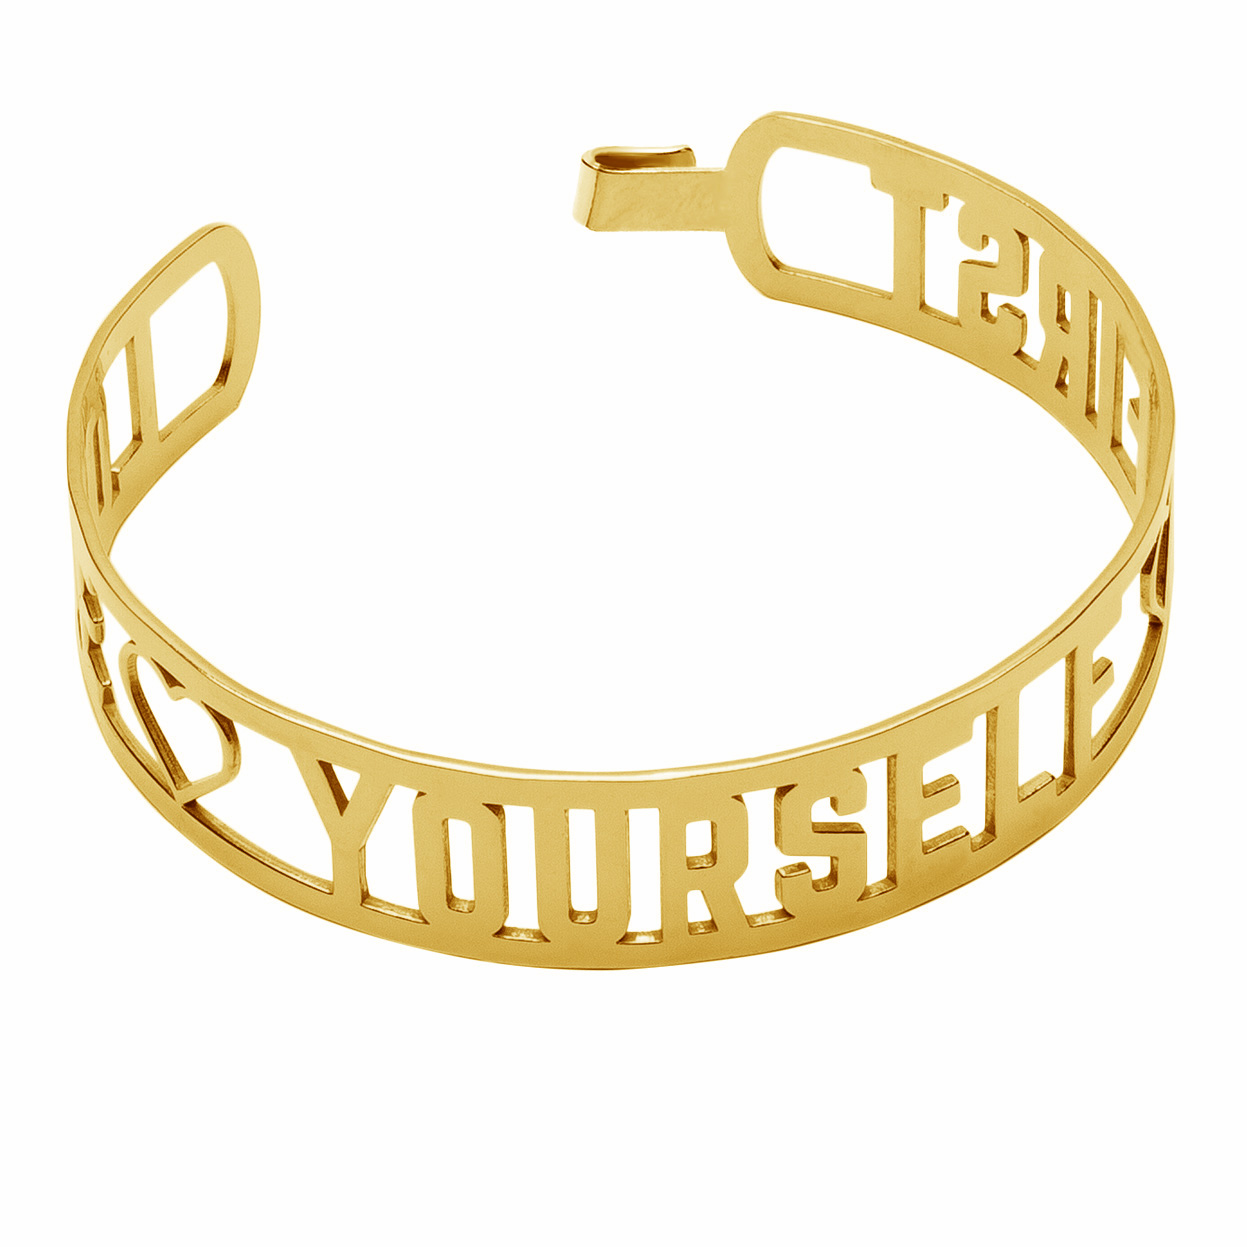 LOVE YOURSELF FIRST ARMBAND GOLD 14K